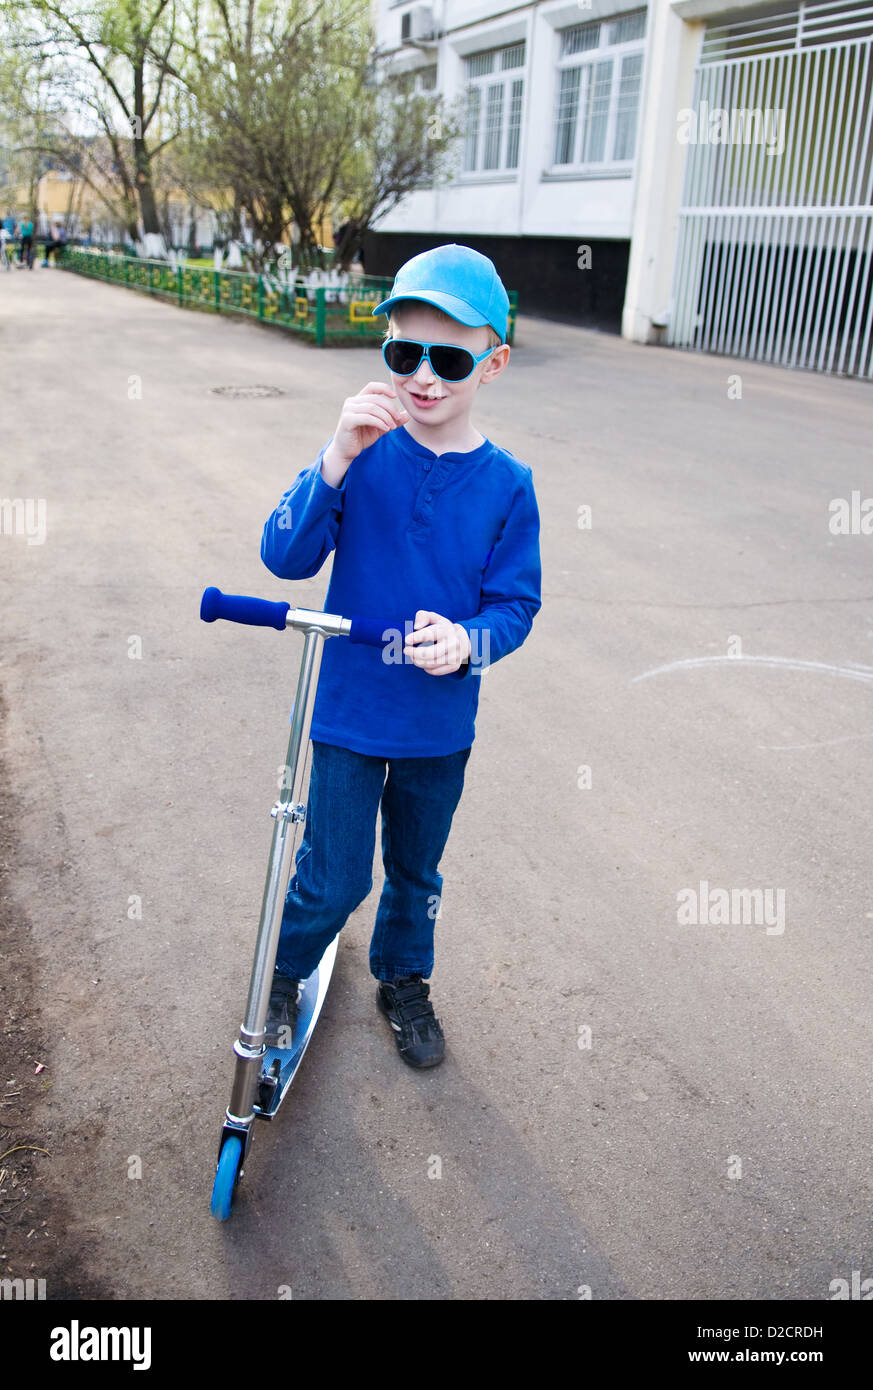 Cute smiling boy wearing sunglasses riding scooter Banque D'Images